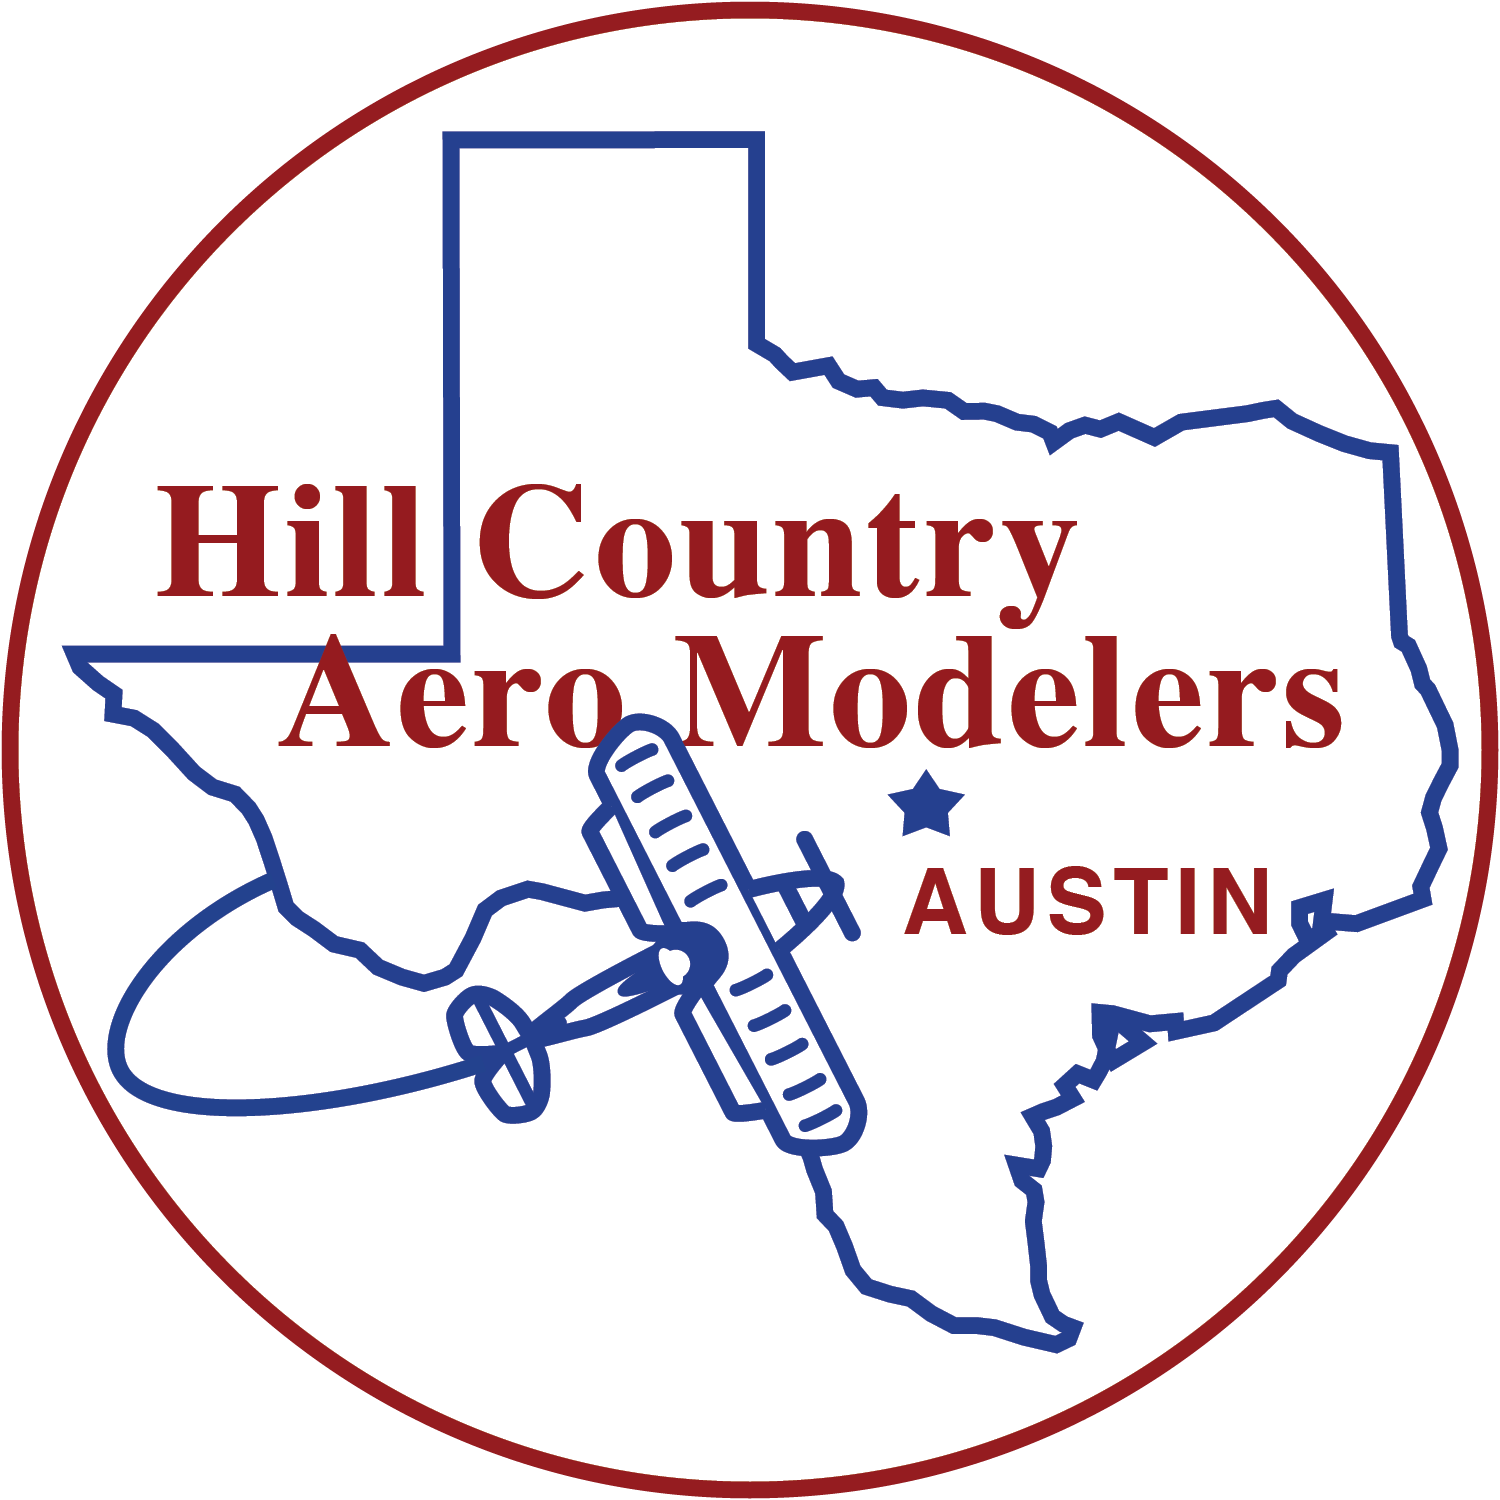 Hill Country AeroModelers